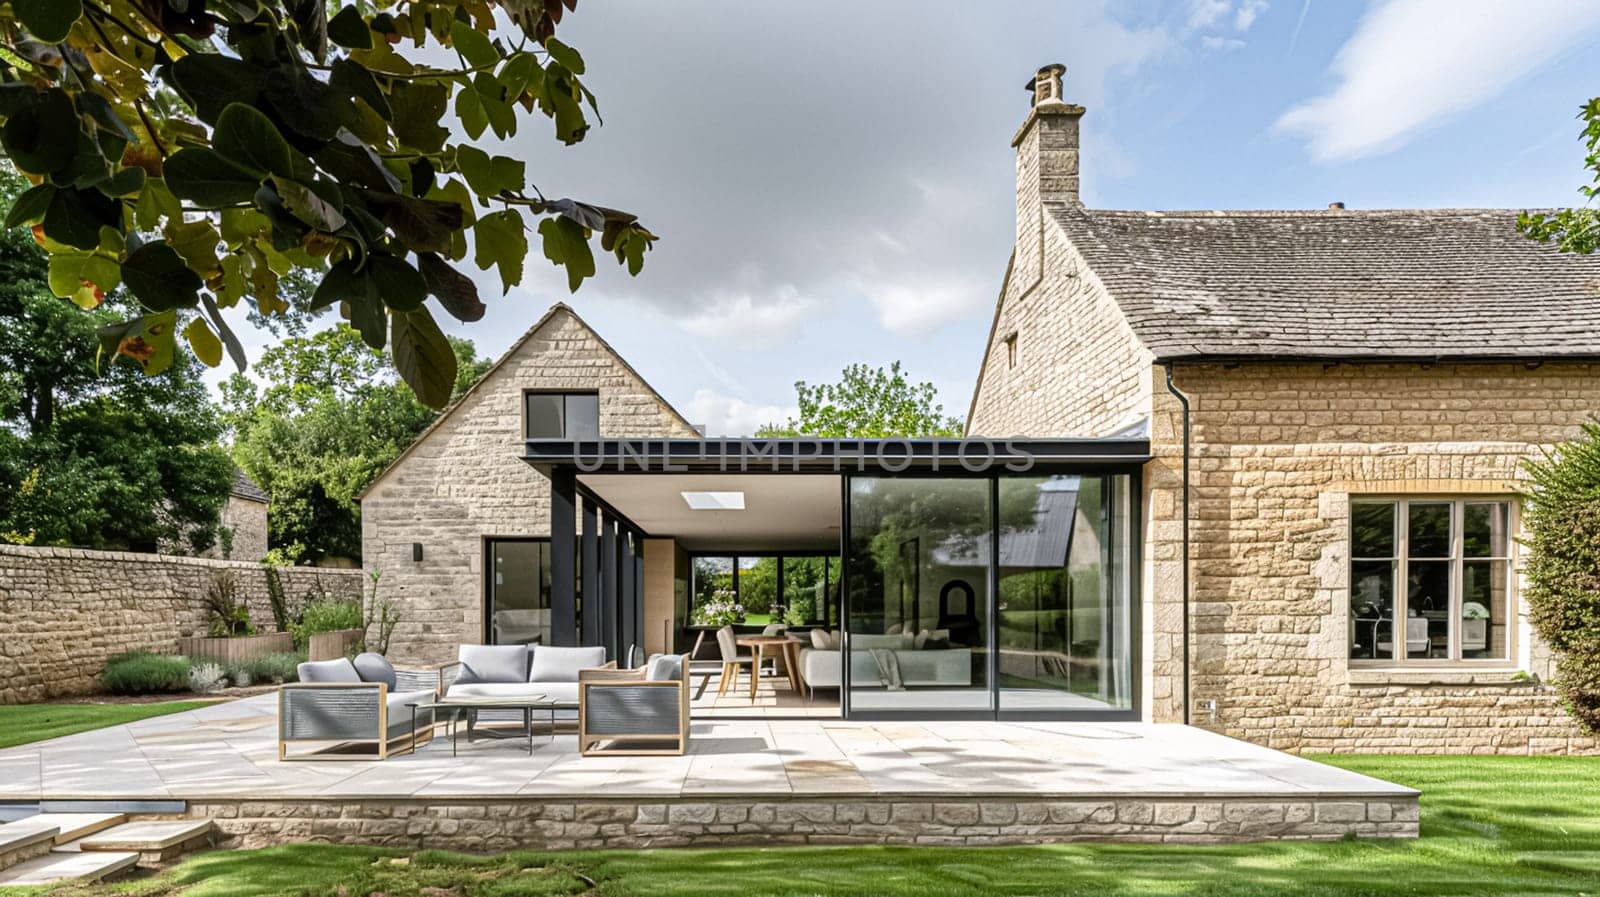 Cotswolds cottage in the English countryside style, modern architecture and design